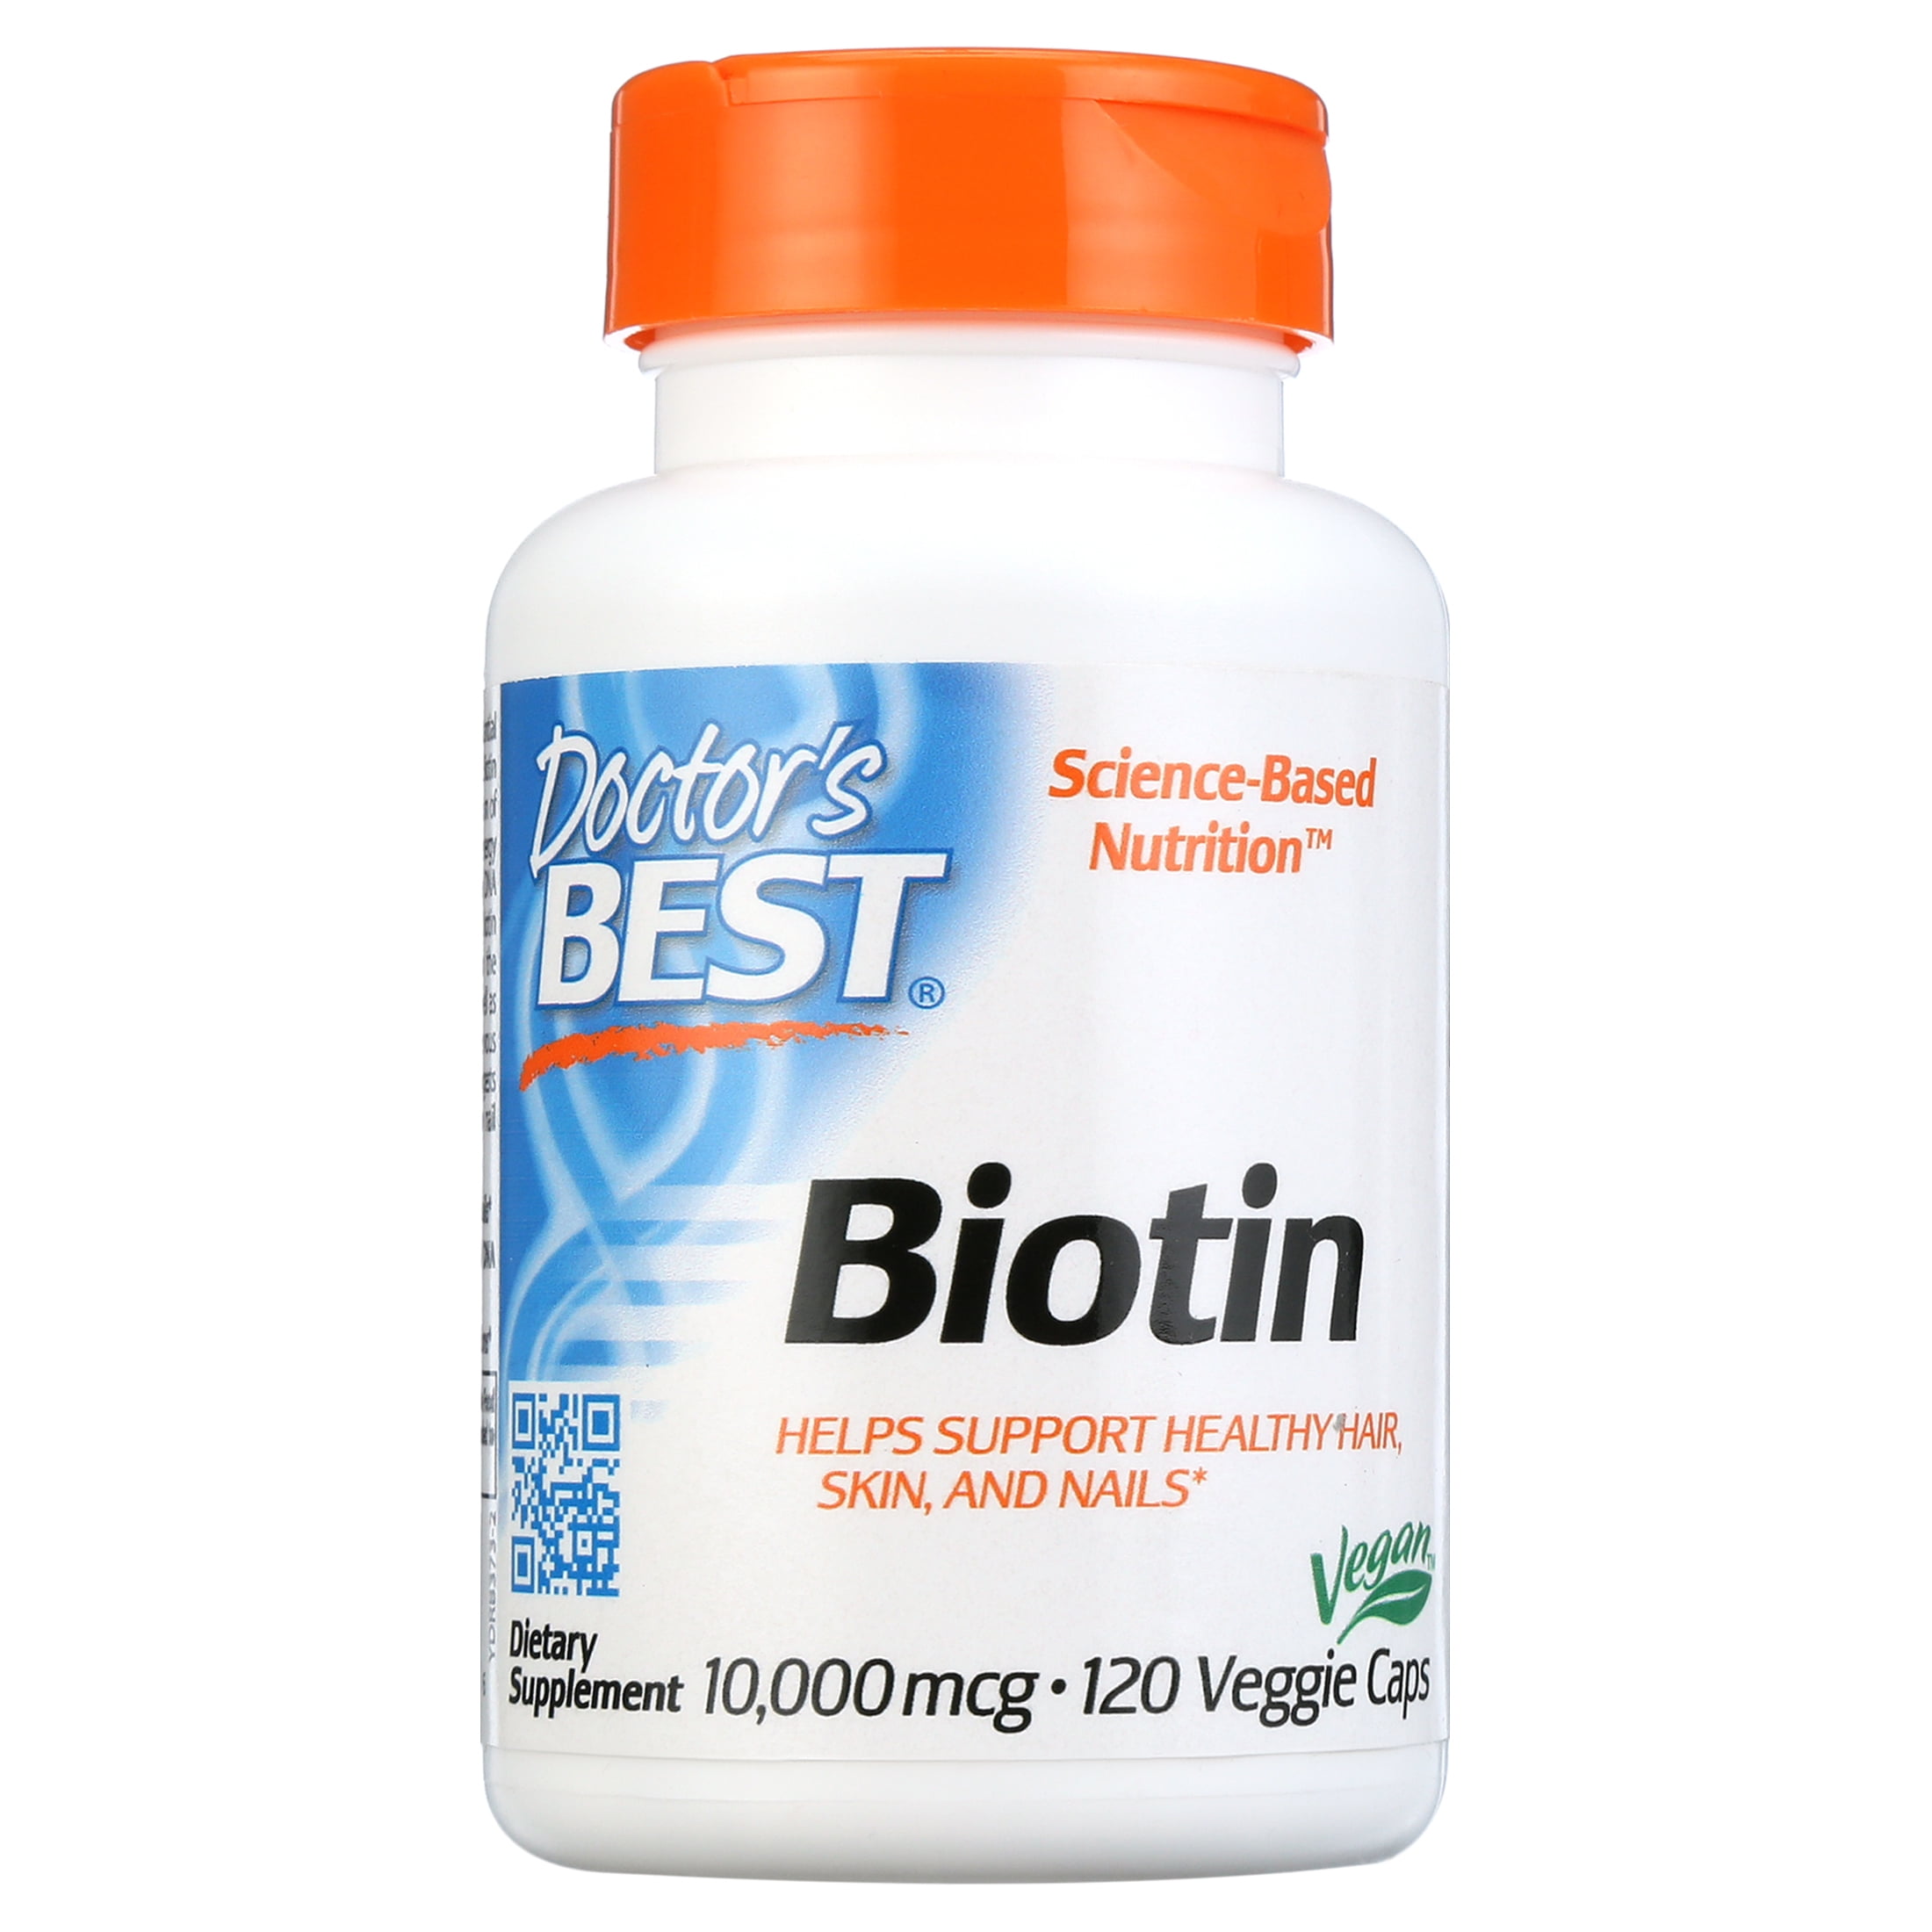 What is biotin? What health benefits does biotin have for hair, nails, and  skin? - Quora